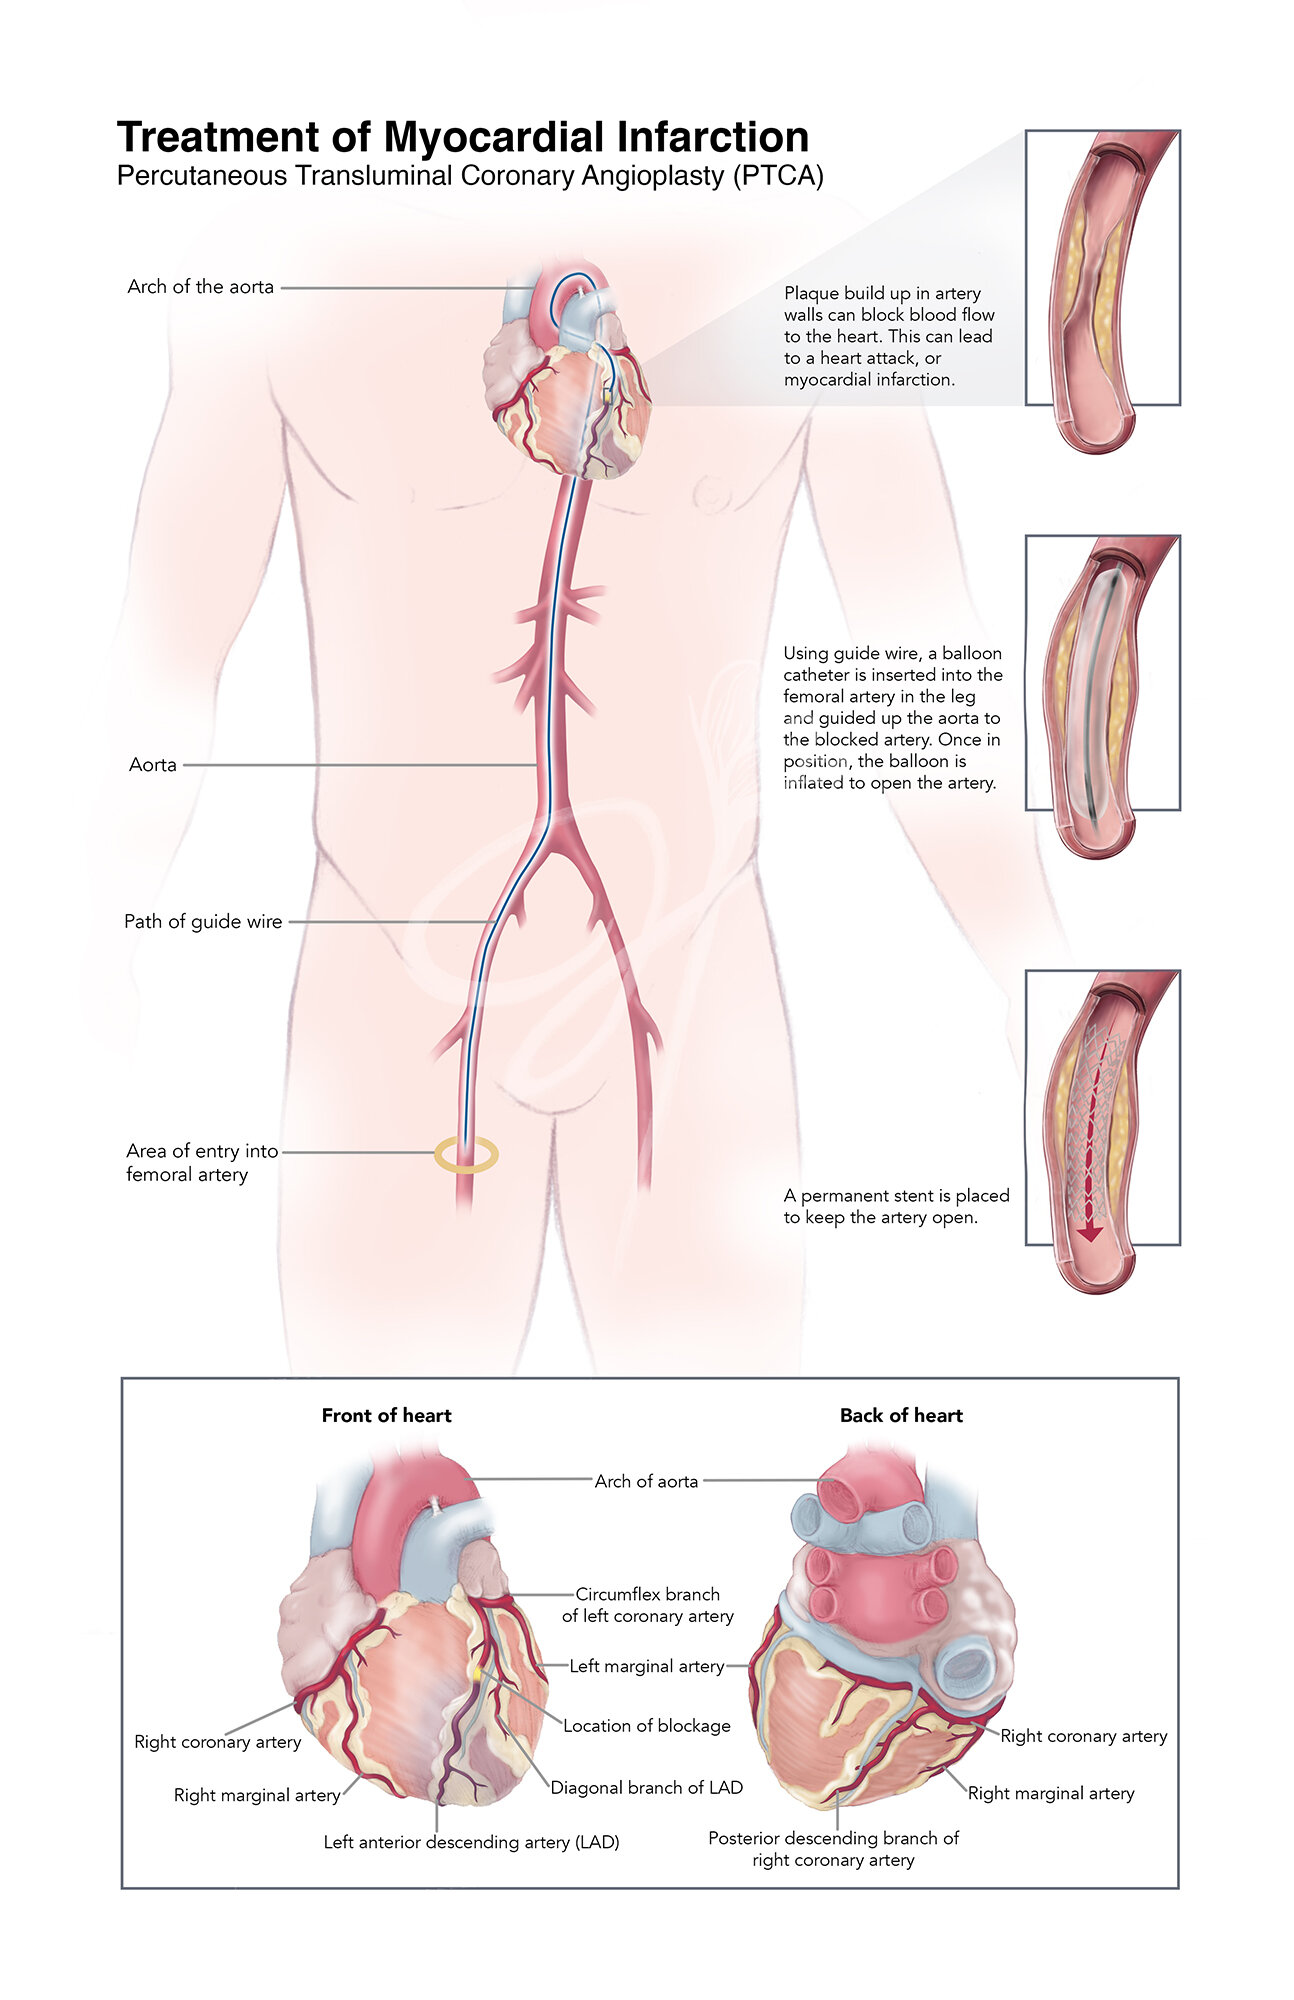   Medium:  Graphite, Photoshop, Illustrator   Objective:  To illustrate the most common configuration of the coronary arteries in the human heart. To explain myocardial infarction and percutaneous transluminal coronary angioplasty (PTCA) to patients 